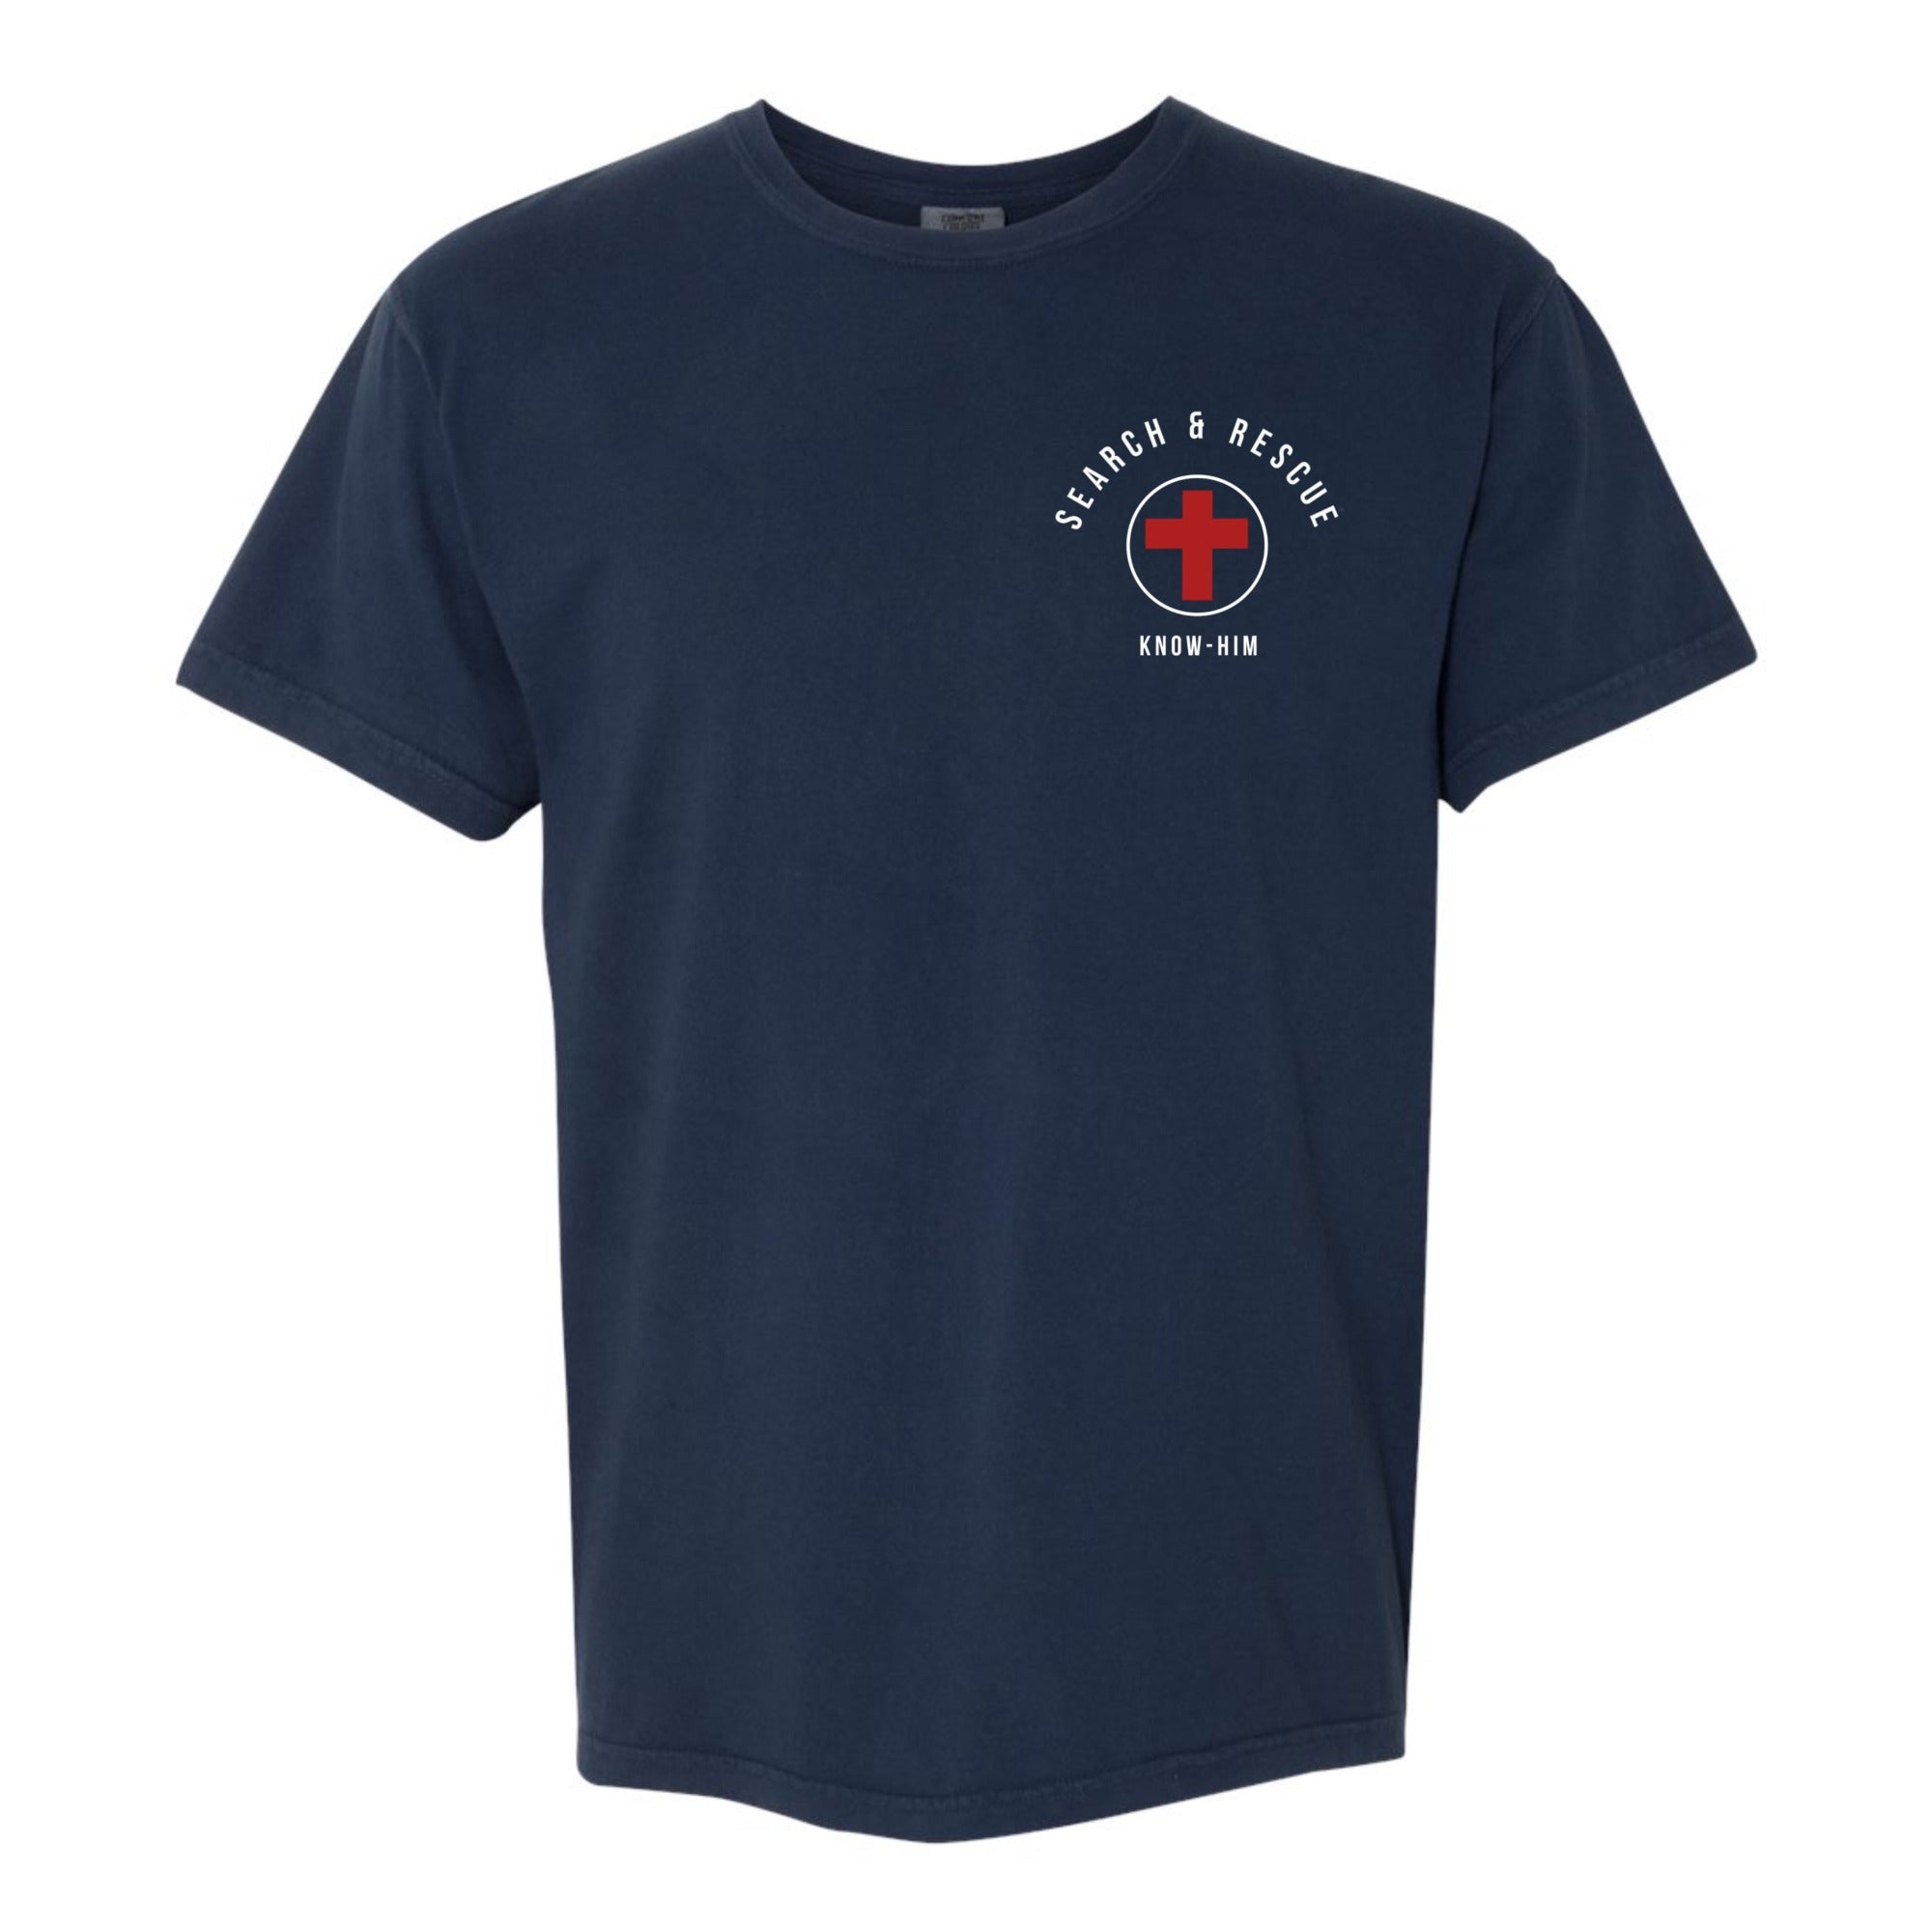 Search and Rescue (Midnight Blue) - Shirt